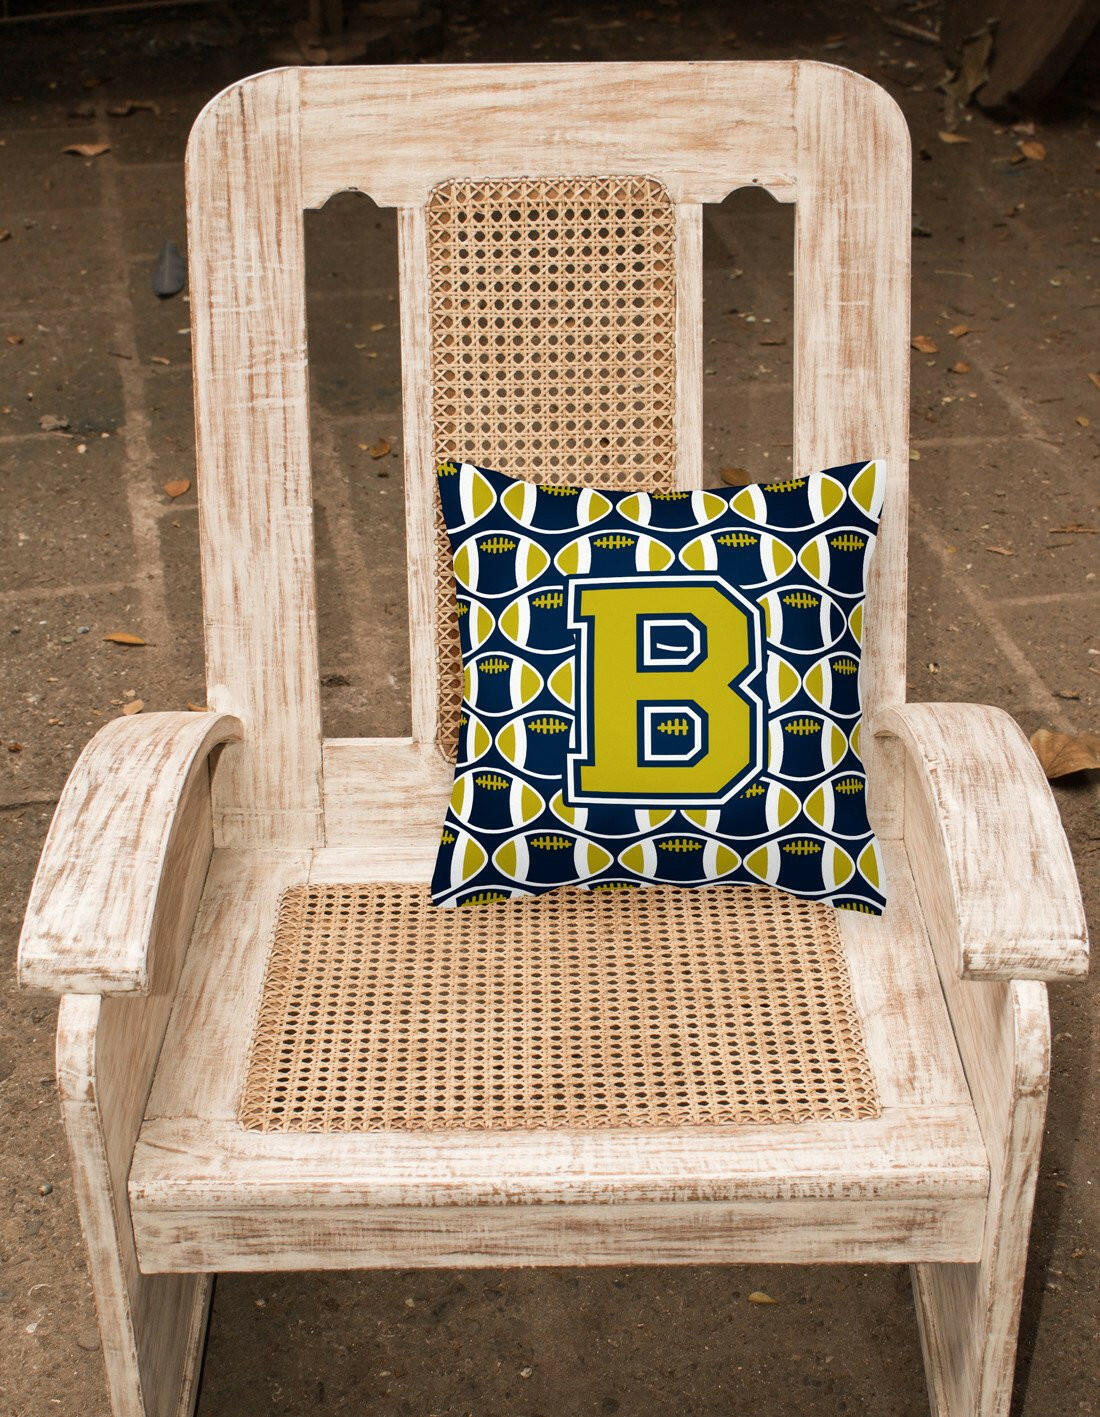 Letter B Football Blue and Gold Fabric Decorative Pillow CJ1074-BPW1414 by Caroline's Treasures